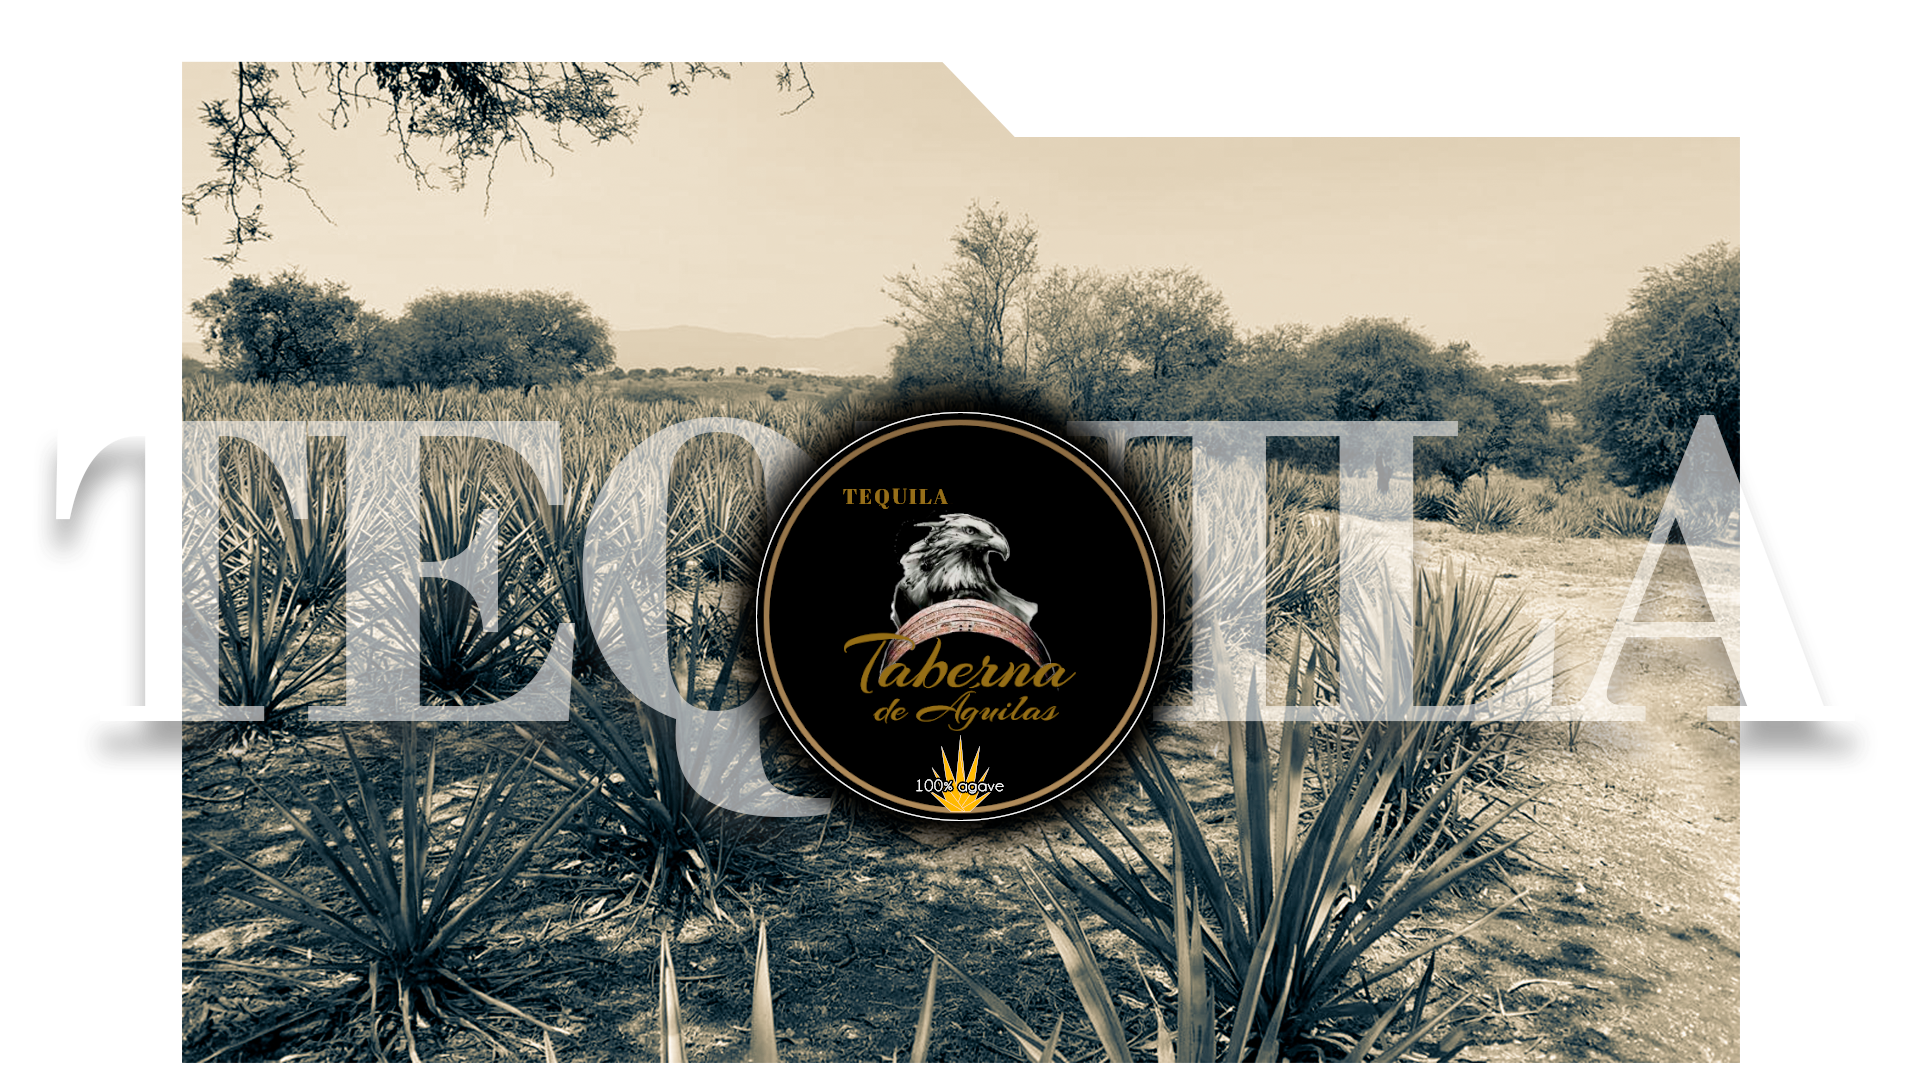 Tequila taberna de aguilas tequila 100% agave